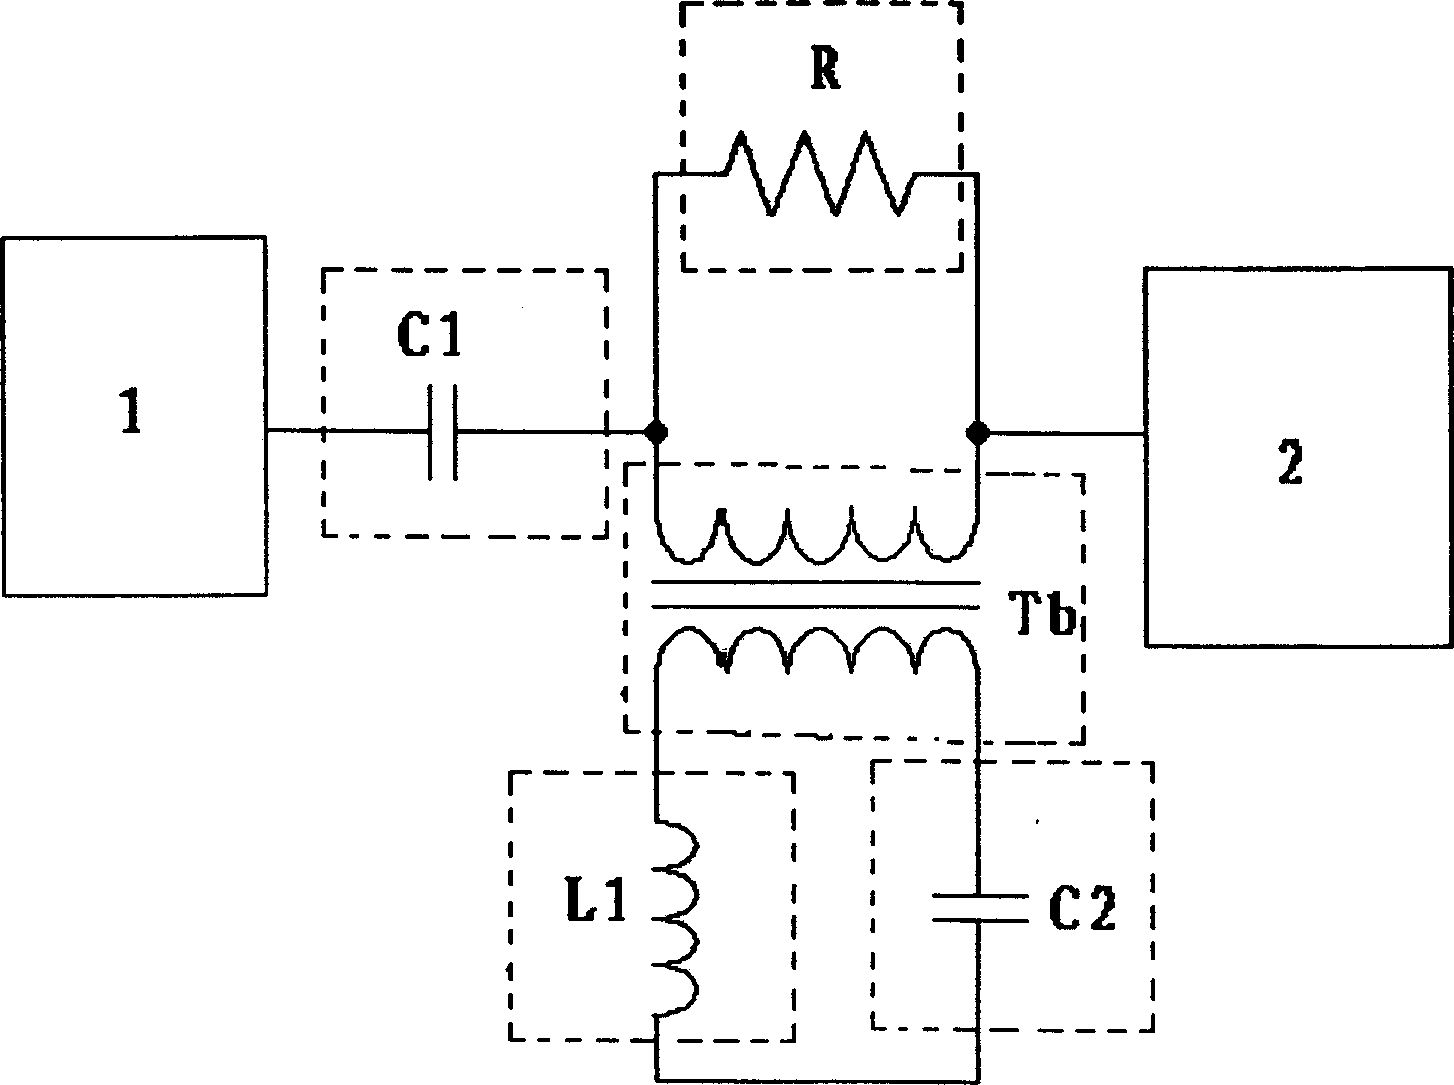 Series capacitor compensating device capable of inhibiting sub-syuchronous resonance of electric network